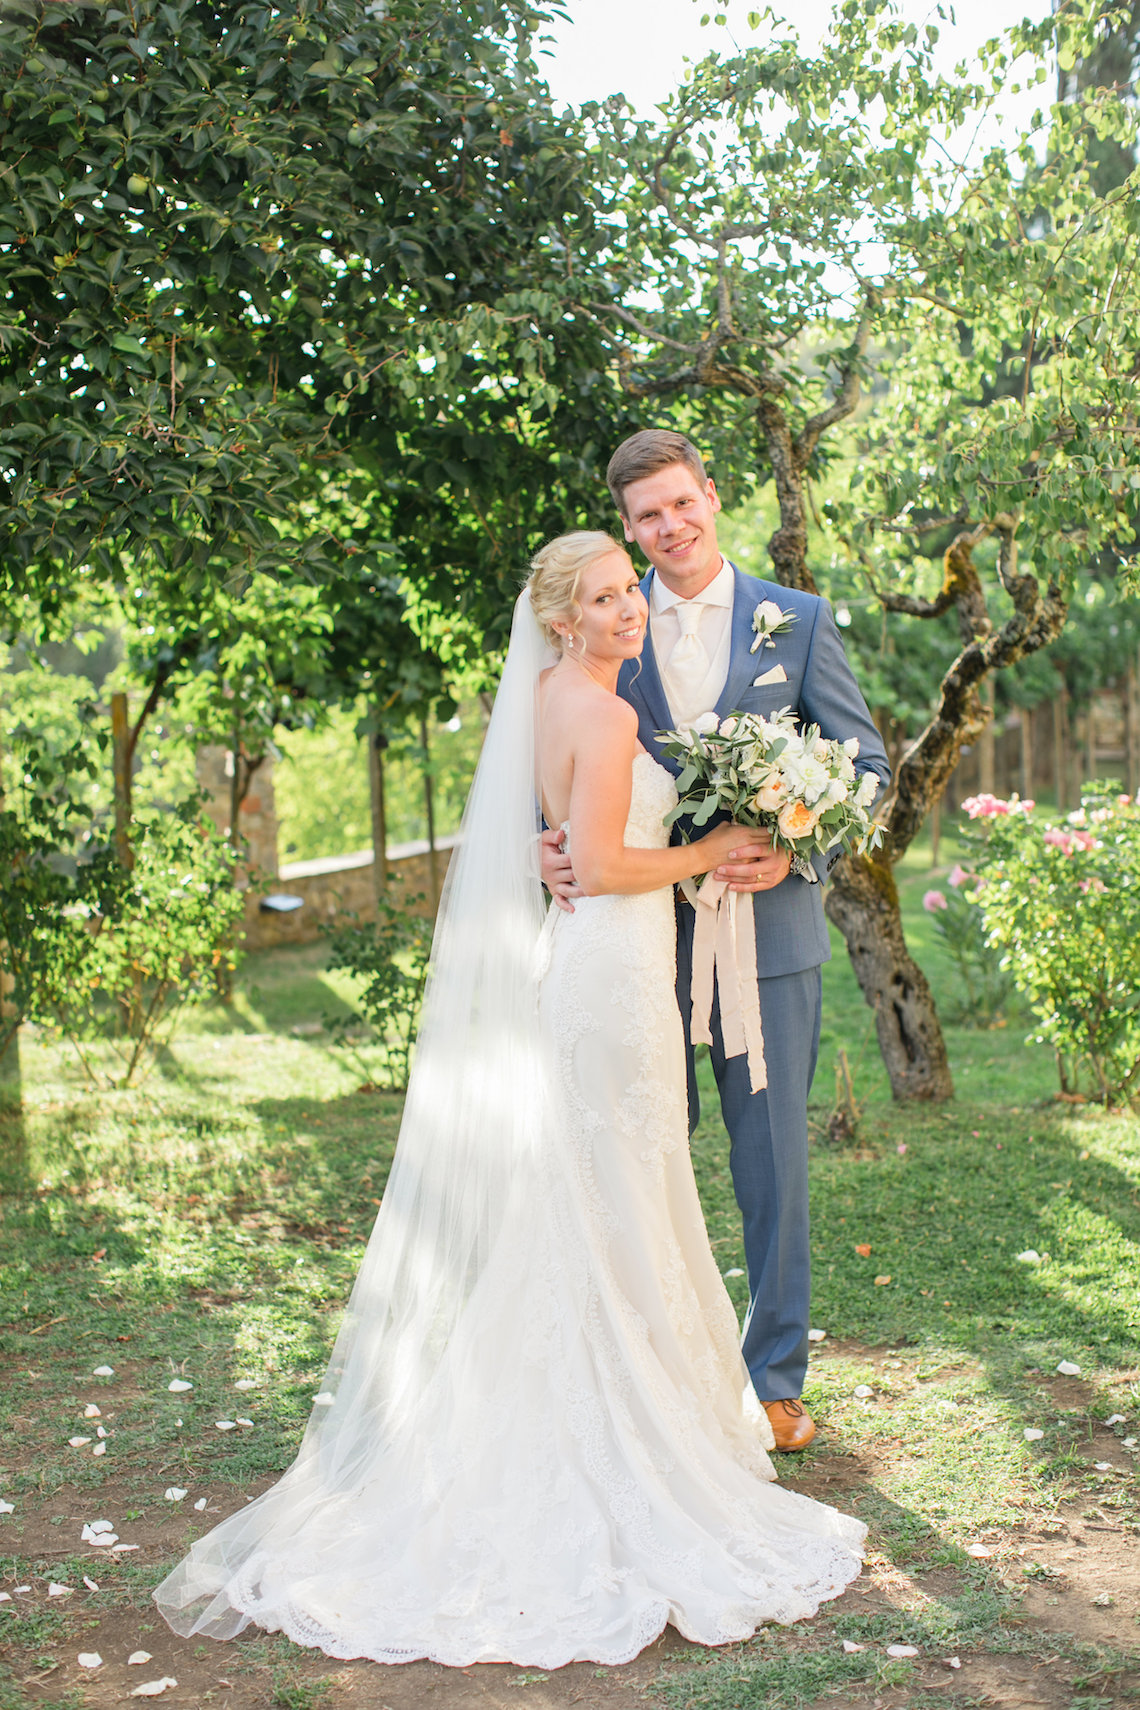 Tuscany wedding at Montelucci Country Resort